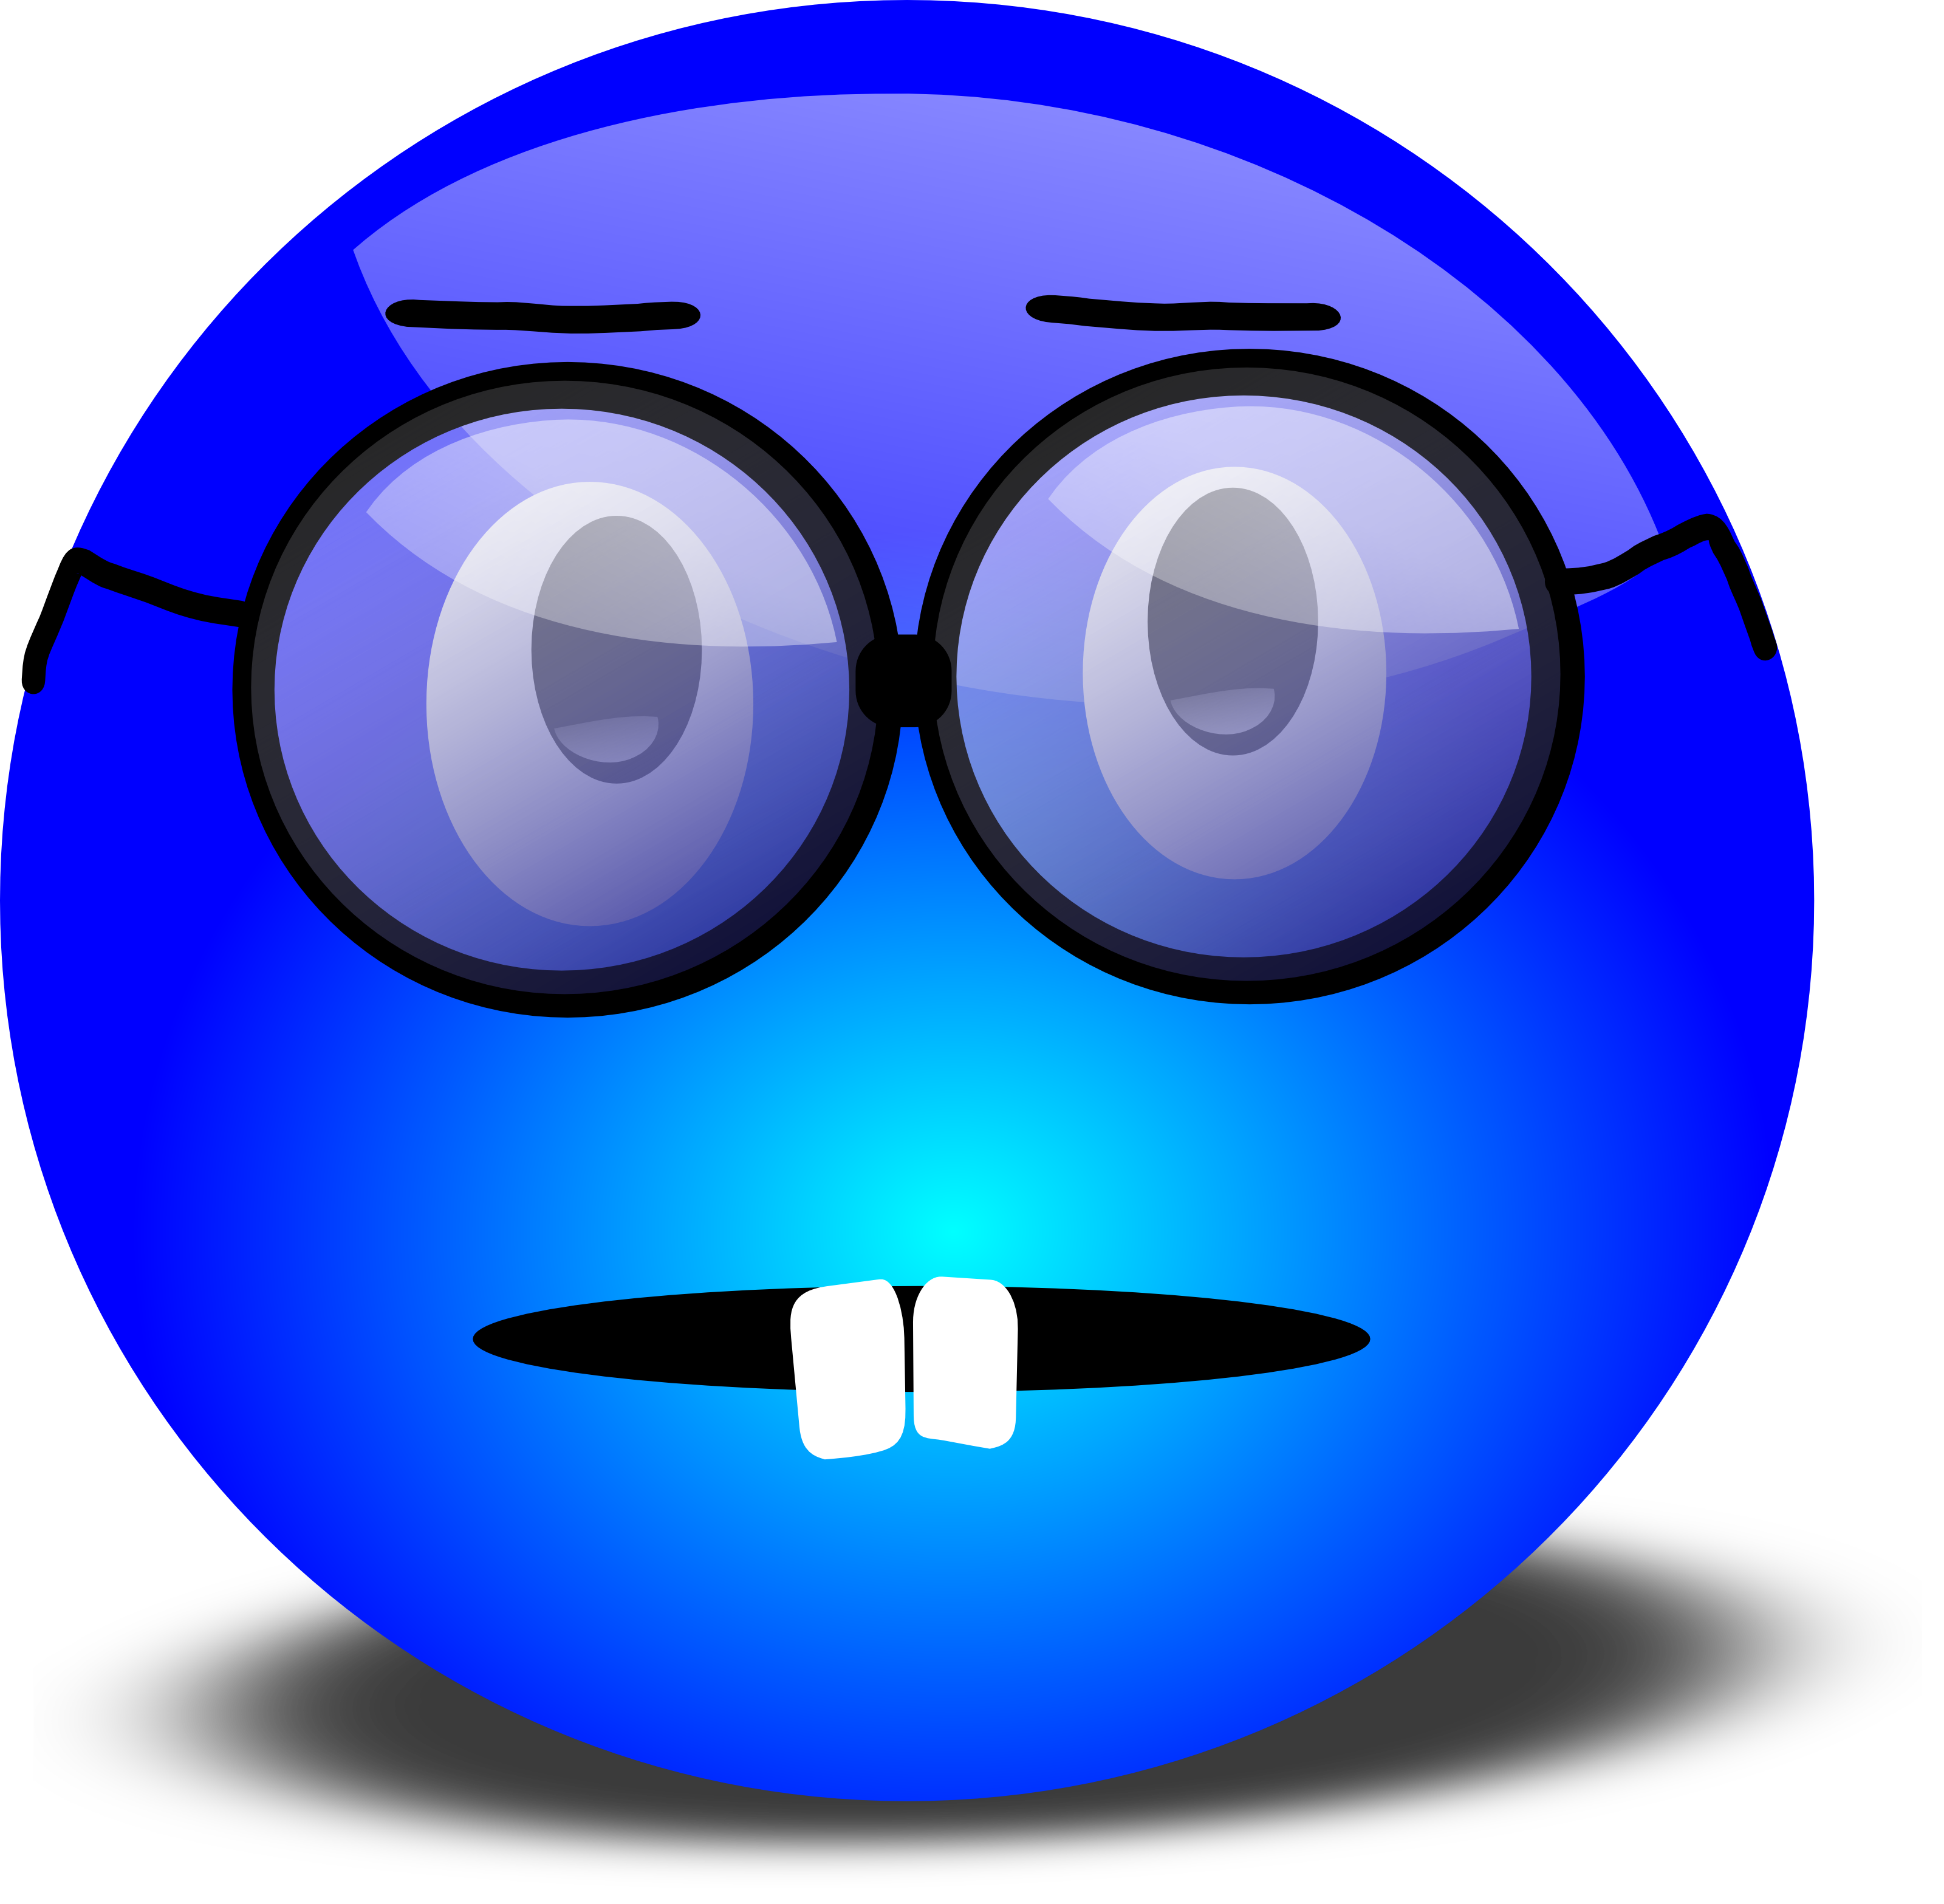 Clipart ruler blue. Smiley face with mustache